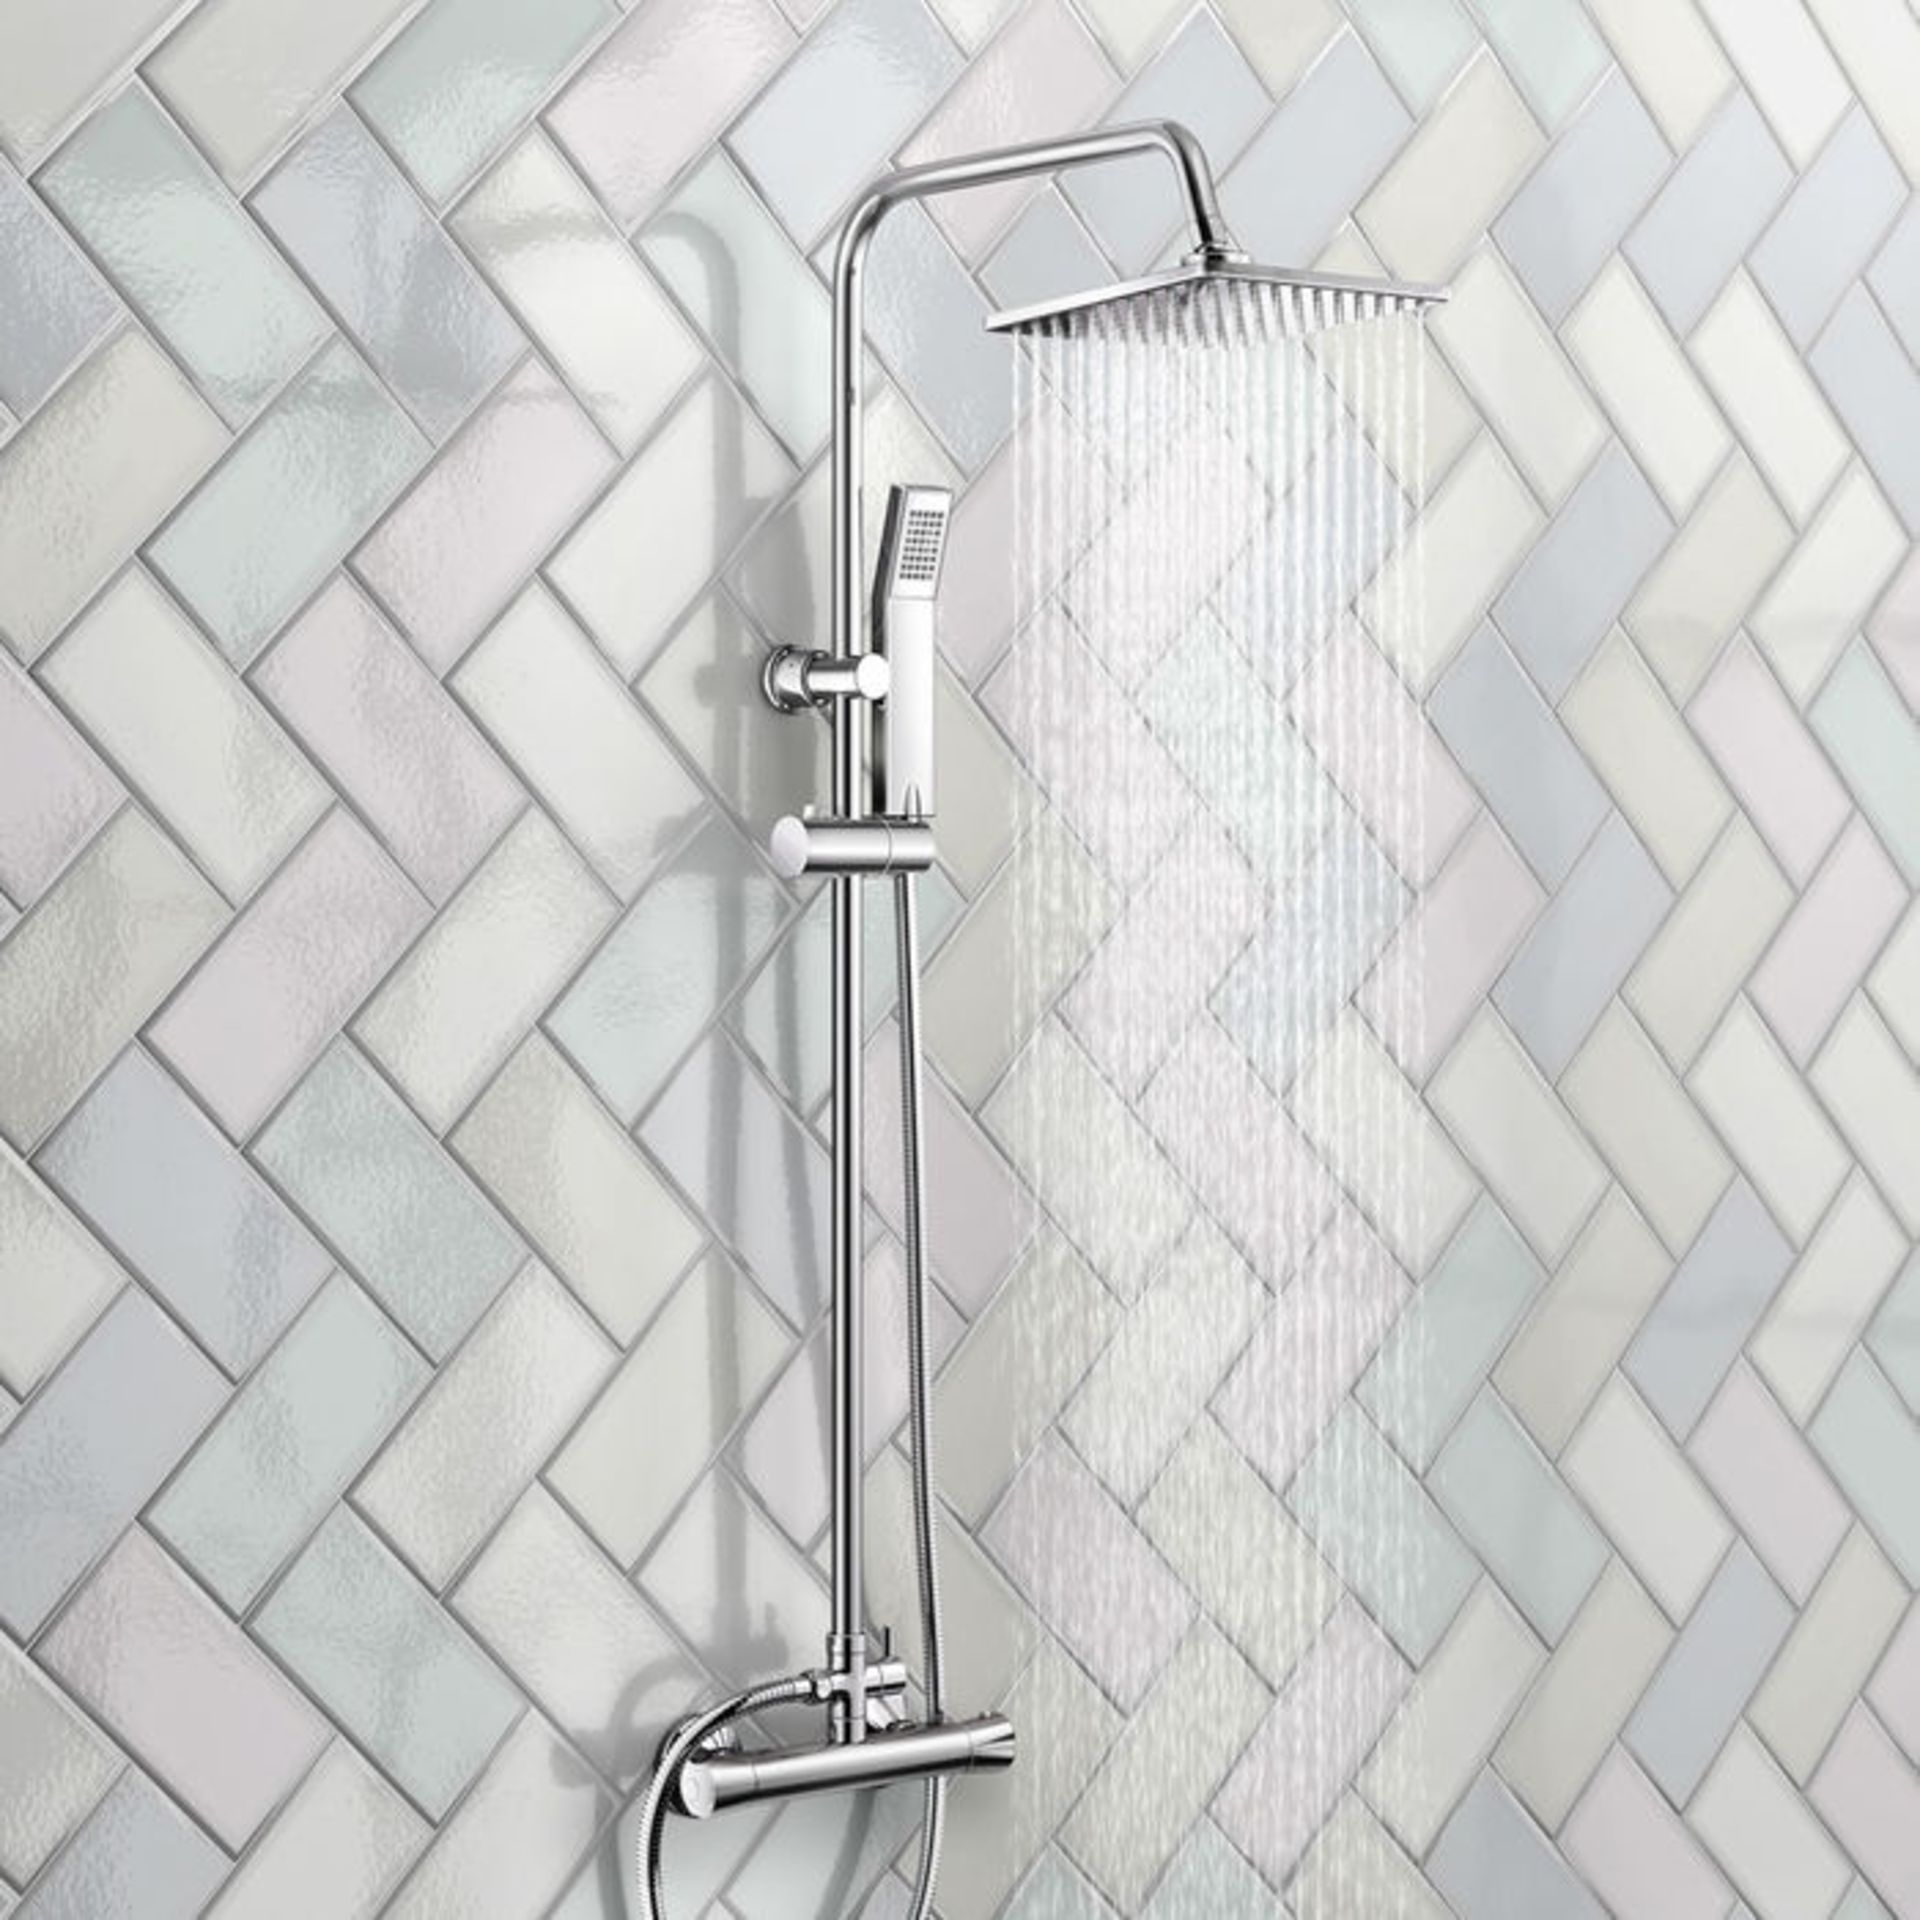 (NY97) Square Exposed Thermostatic Shower Kit & Medium Head. Curved features and contemporary